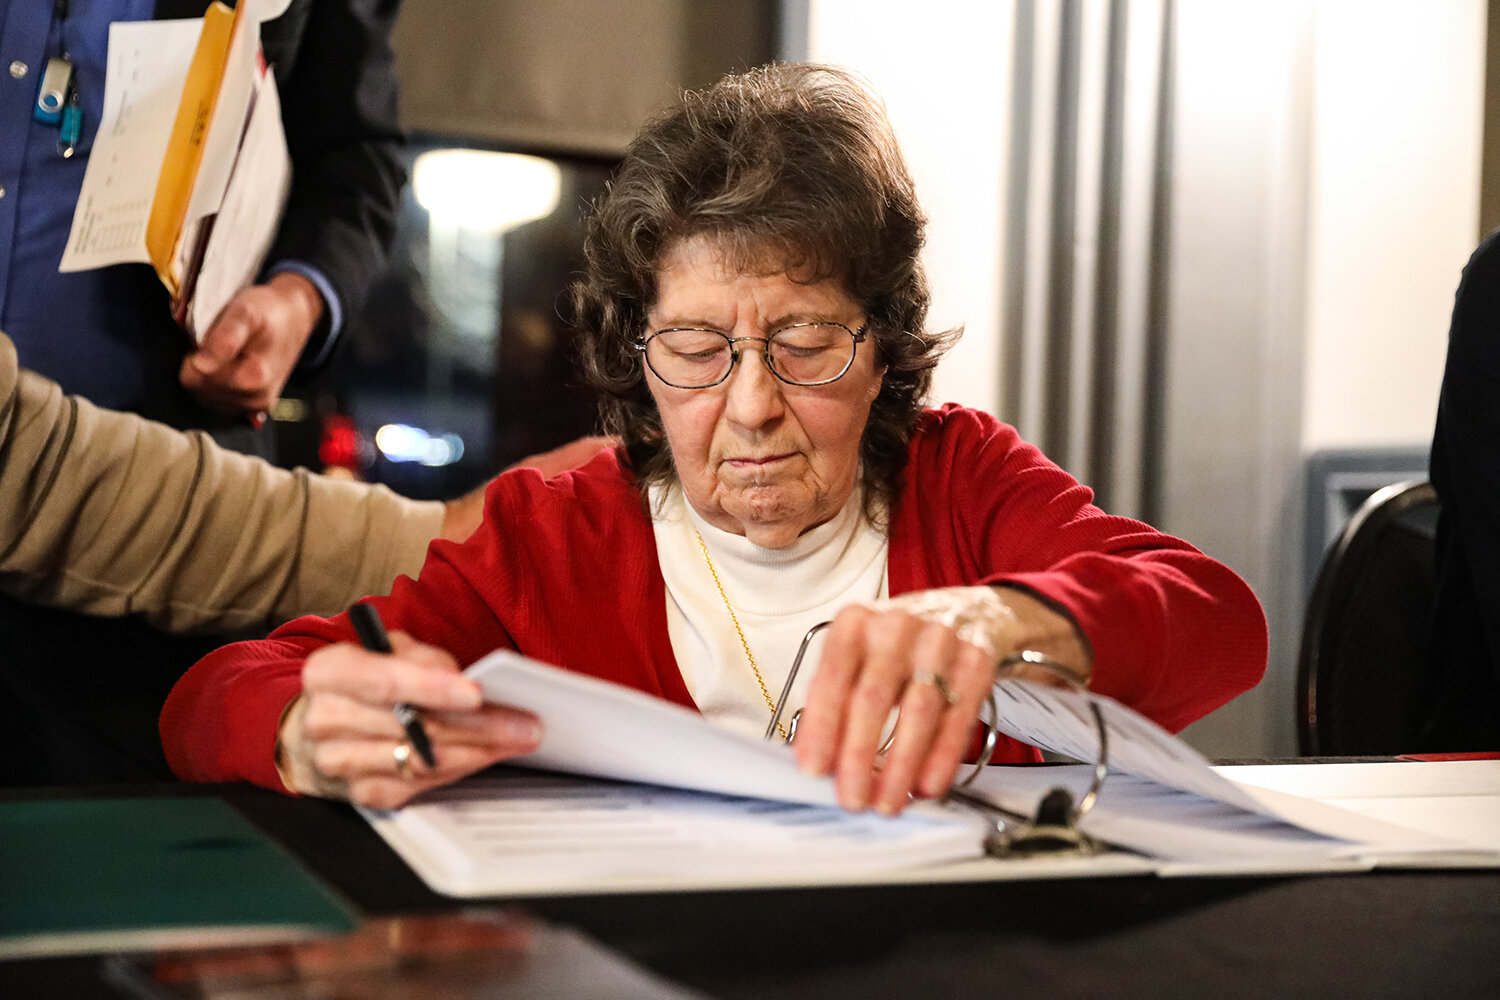  Sandra Wollcott of Cedar Rapids checks in caucus-goers during the Republican Party Caucus at the Butcher Block Steakhouse in Cedar Rapids, IA on Monday, Feb 3, 2020.  